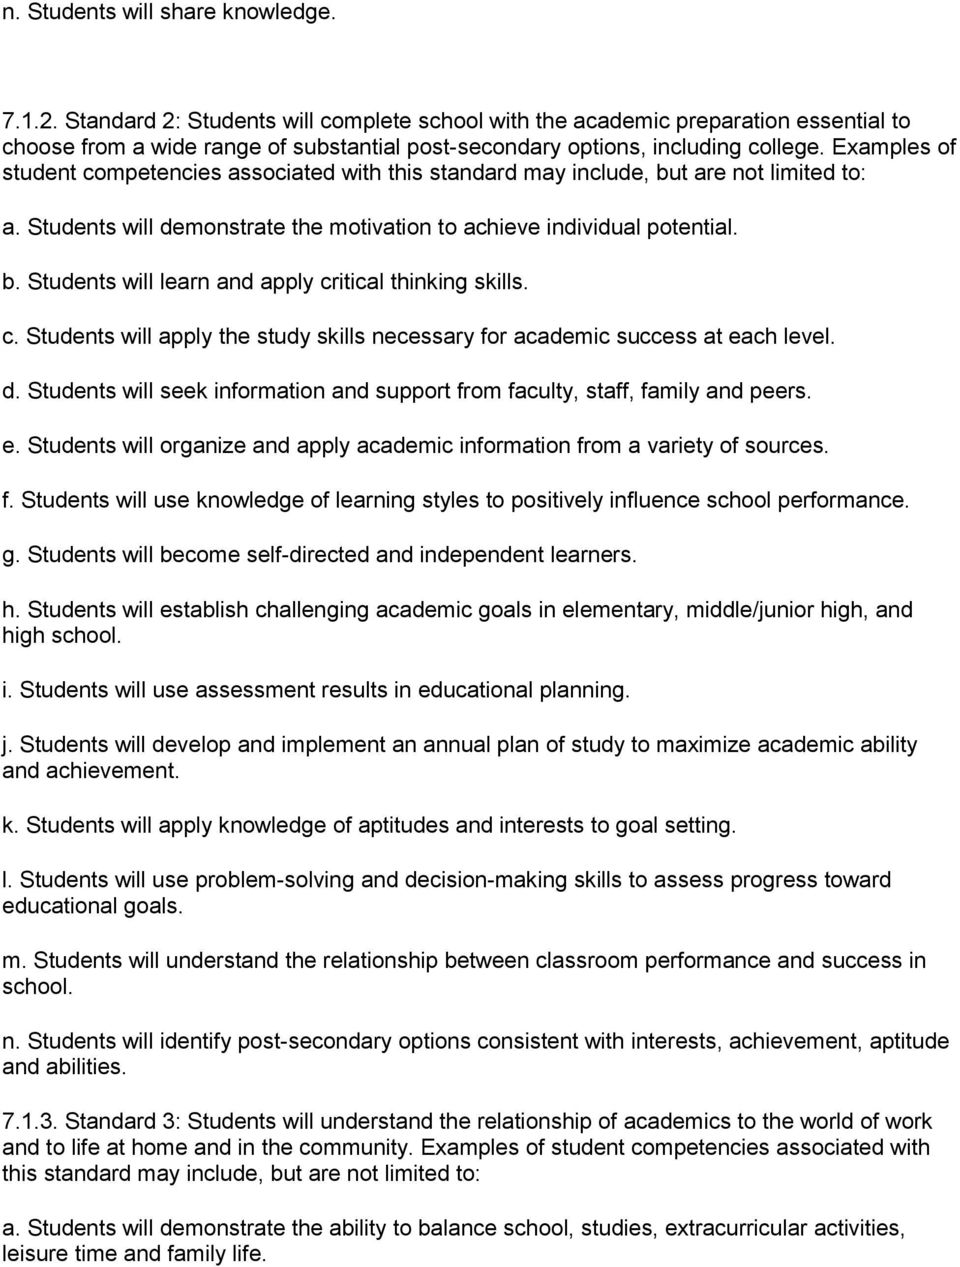 Examples of student competencies associated with this standard may include, but are not limited to: a. Students will demonstrate the motivation to achieve individual potential. b. Students will learn and apply critical thinking skills.